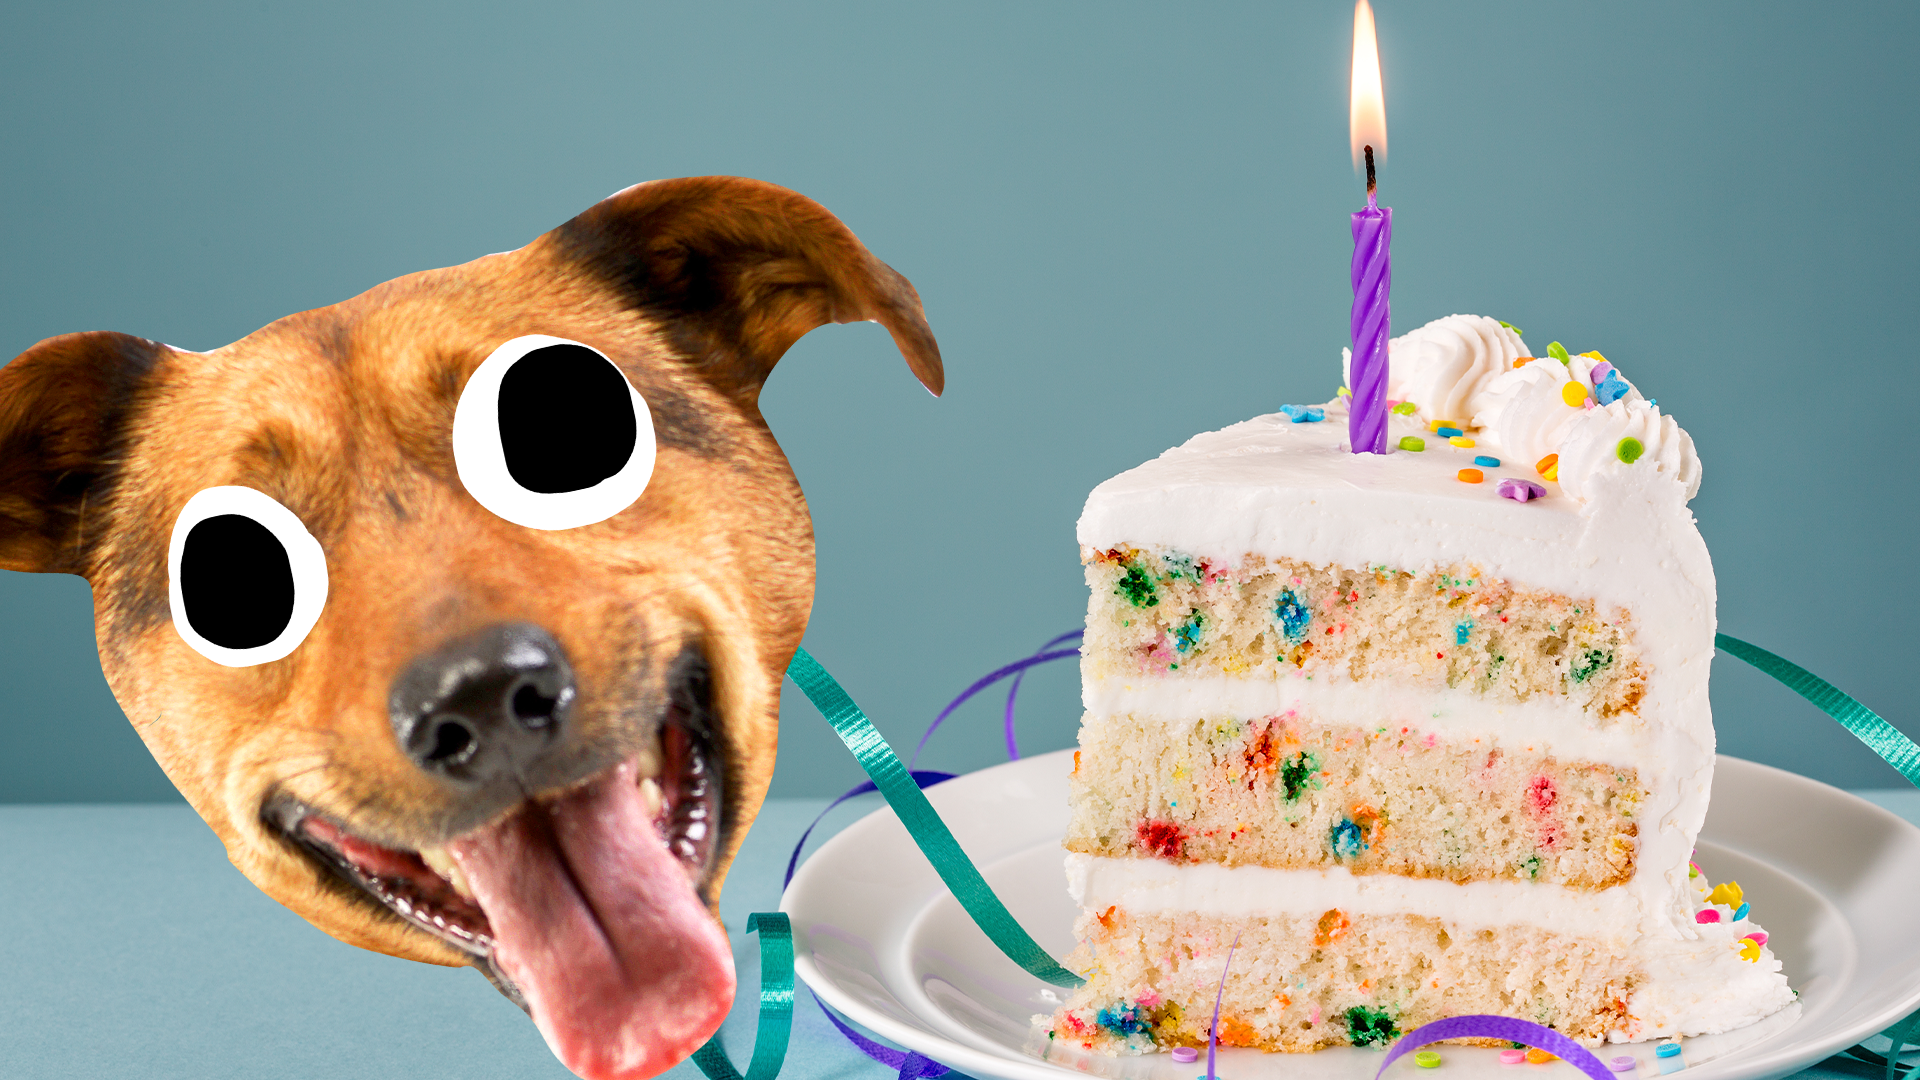 Excited dog face and birthday cake slice on blue background